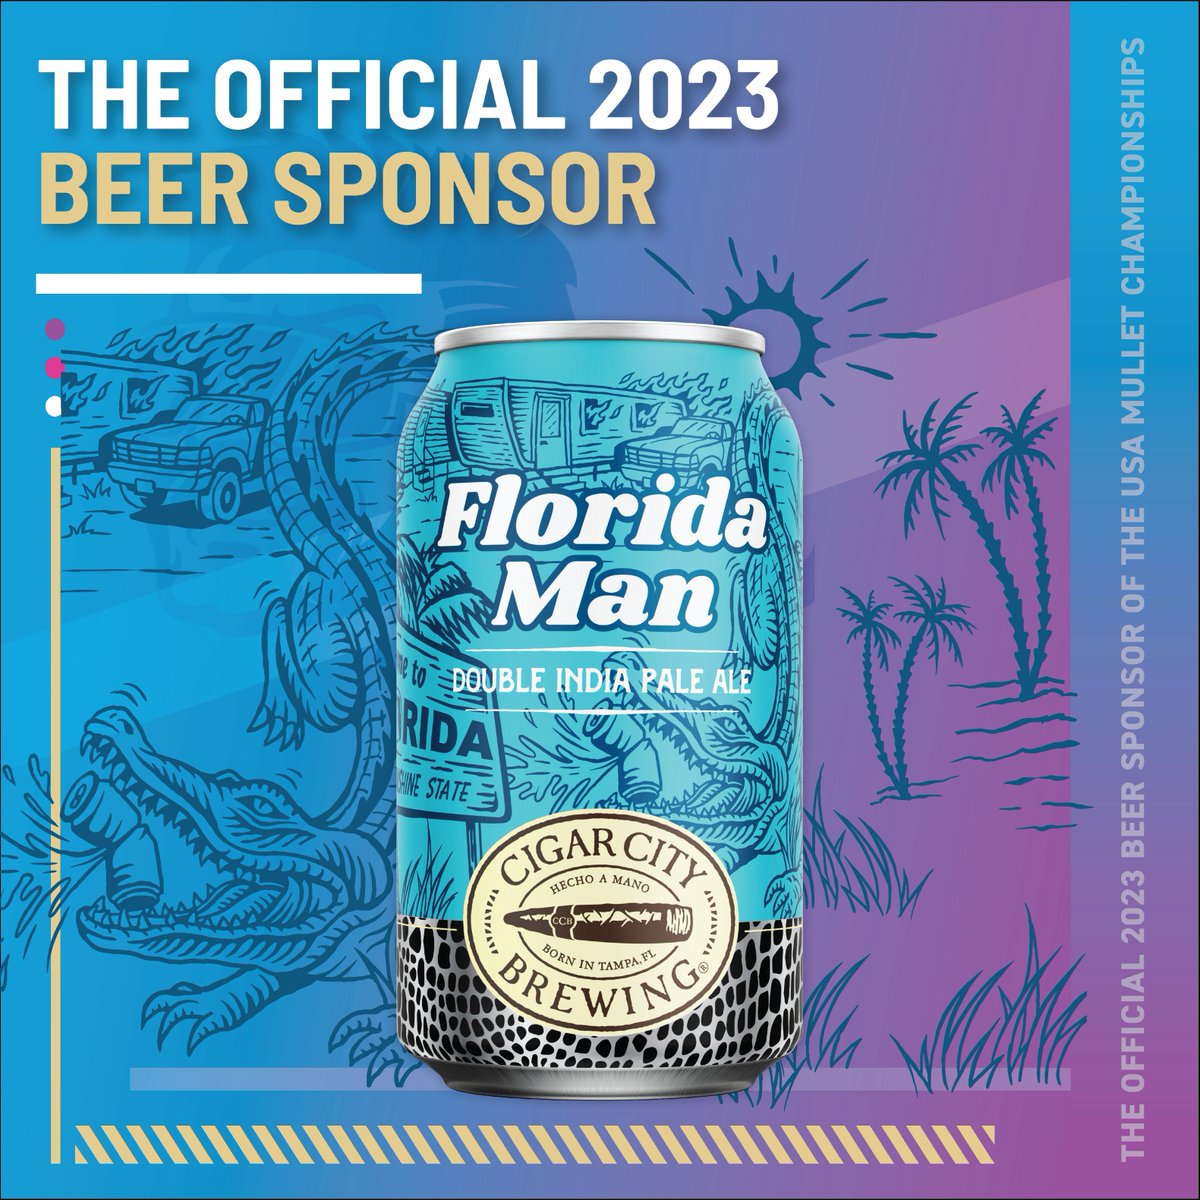 Florida Man is on the hunt for the zaniest mullet in America - find out more and register today! cigarcitybrewing.com/florida-man-mu…